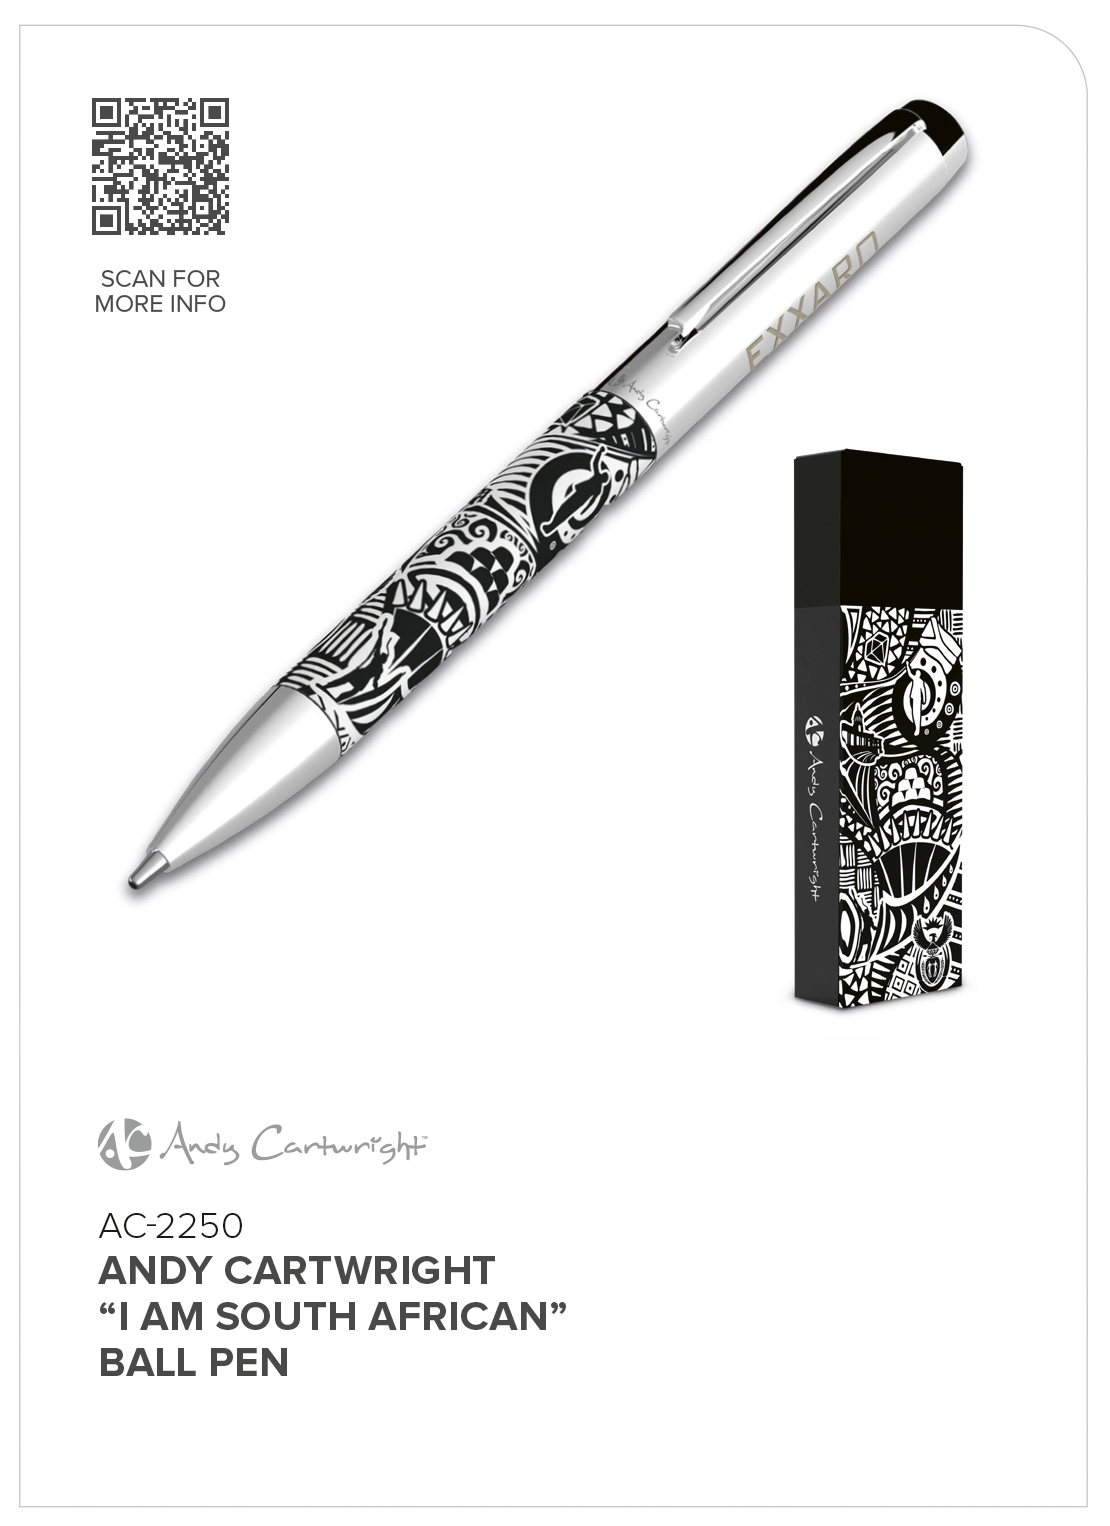 Andy Cartwright 'I Am South African' Ball Pen